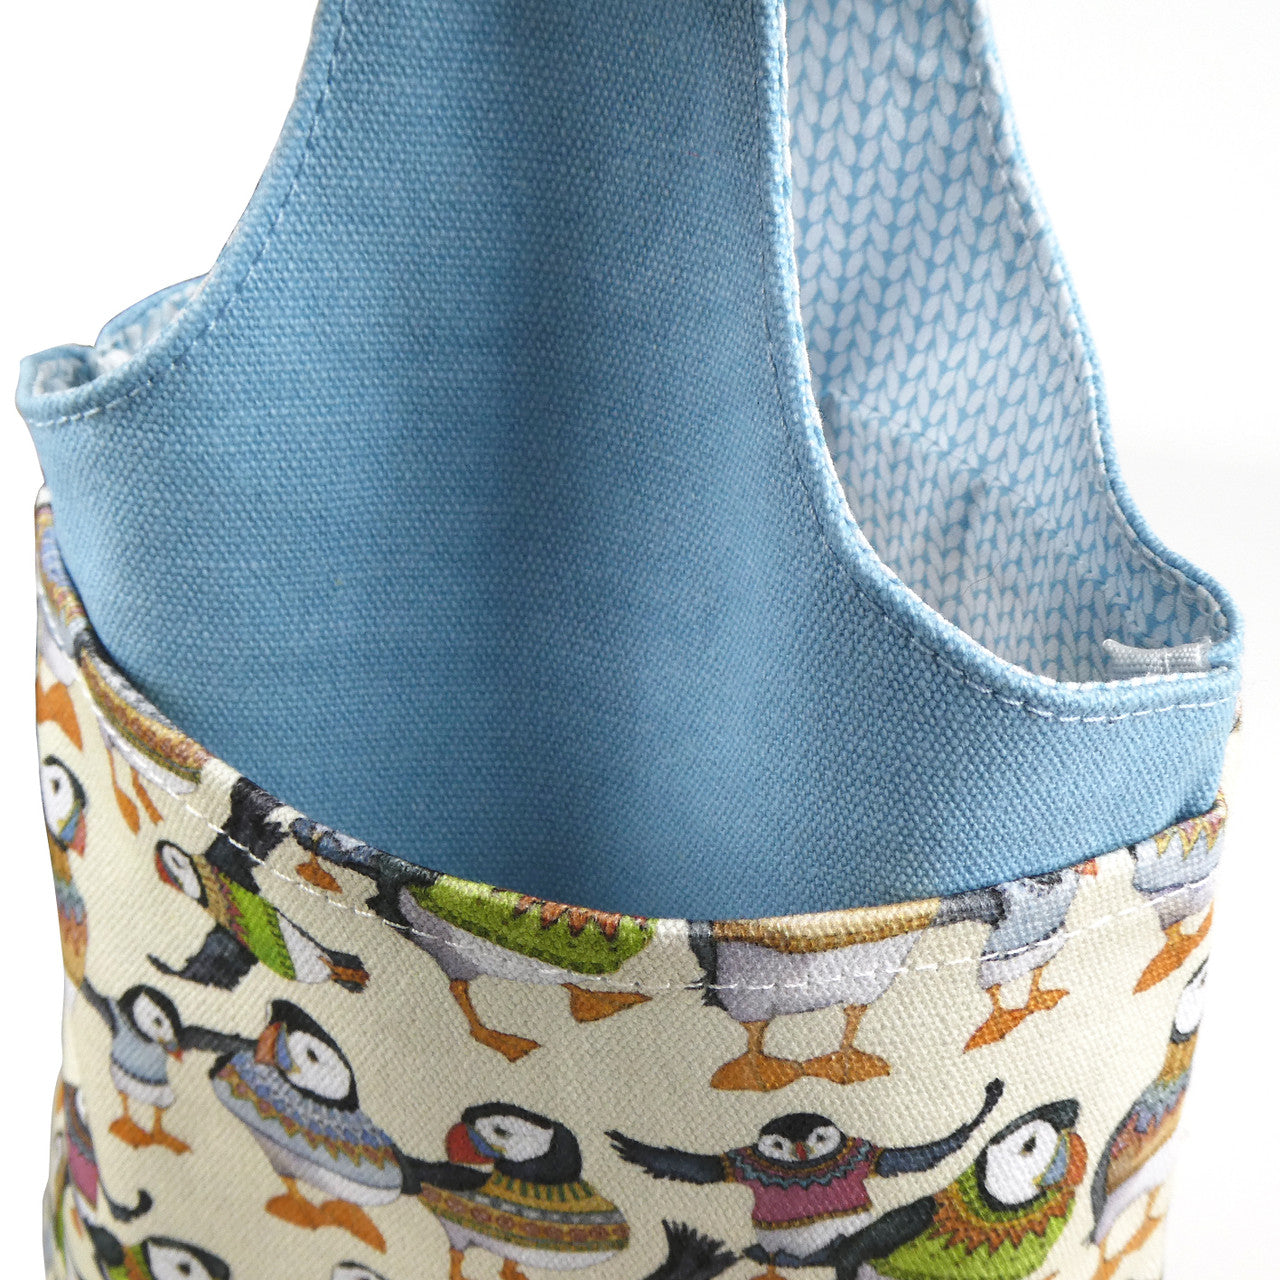 Woolly Puffins 100% cotton Small Wrist Bag from Emma Ball.